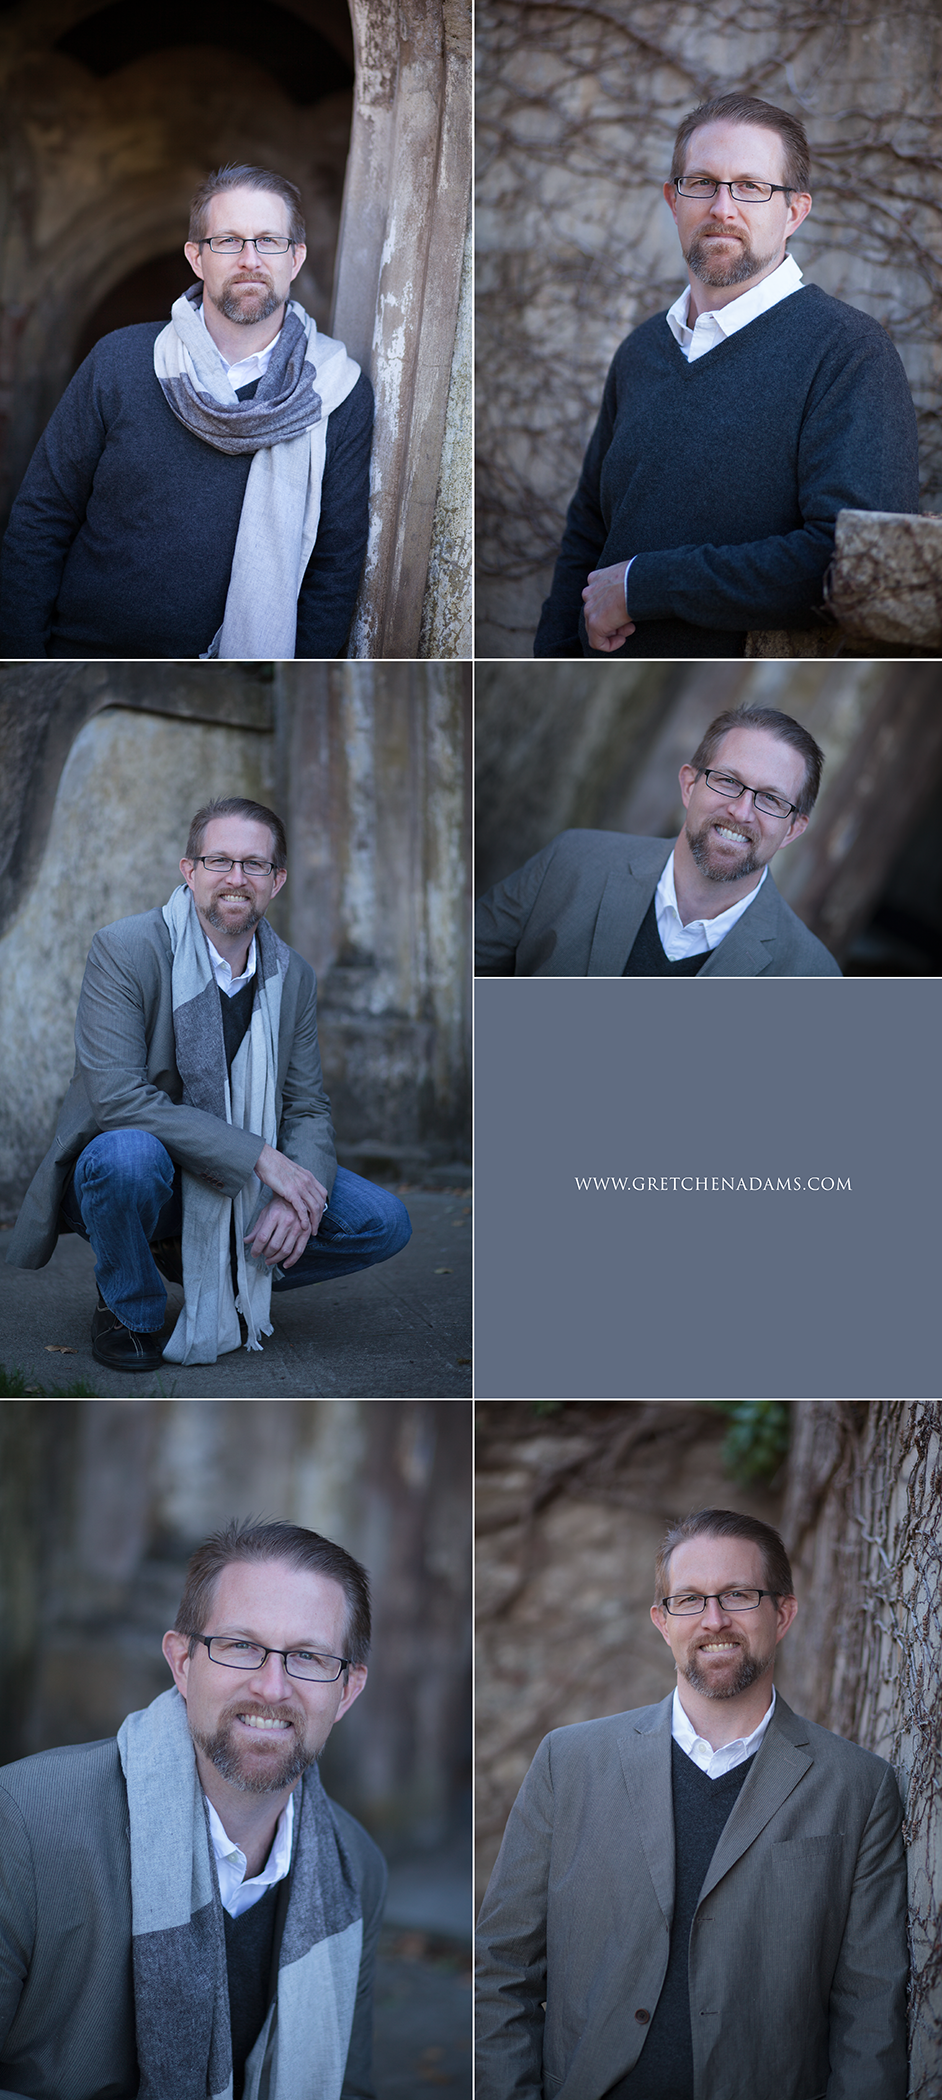 Outdoor business headshots for men SF Bay Area